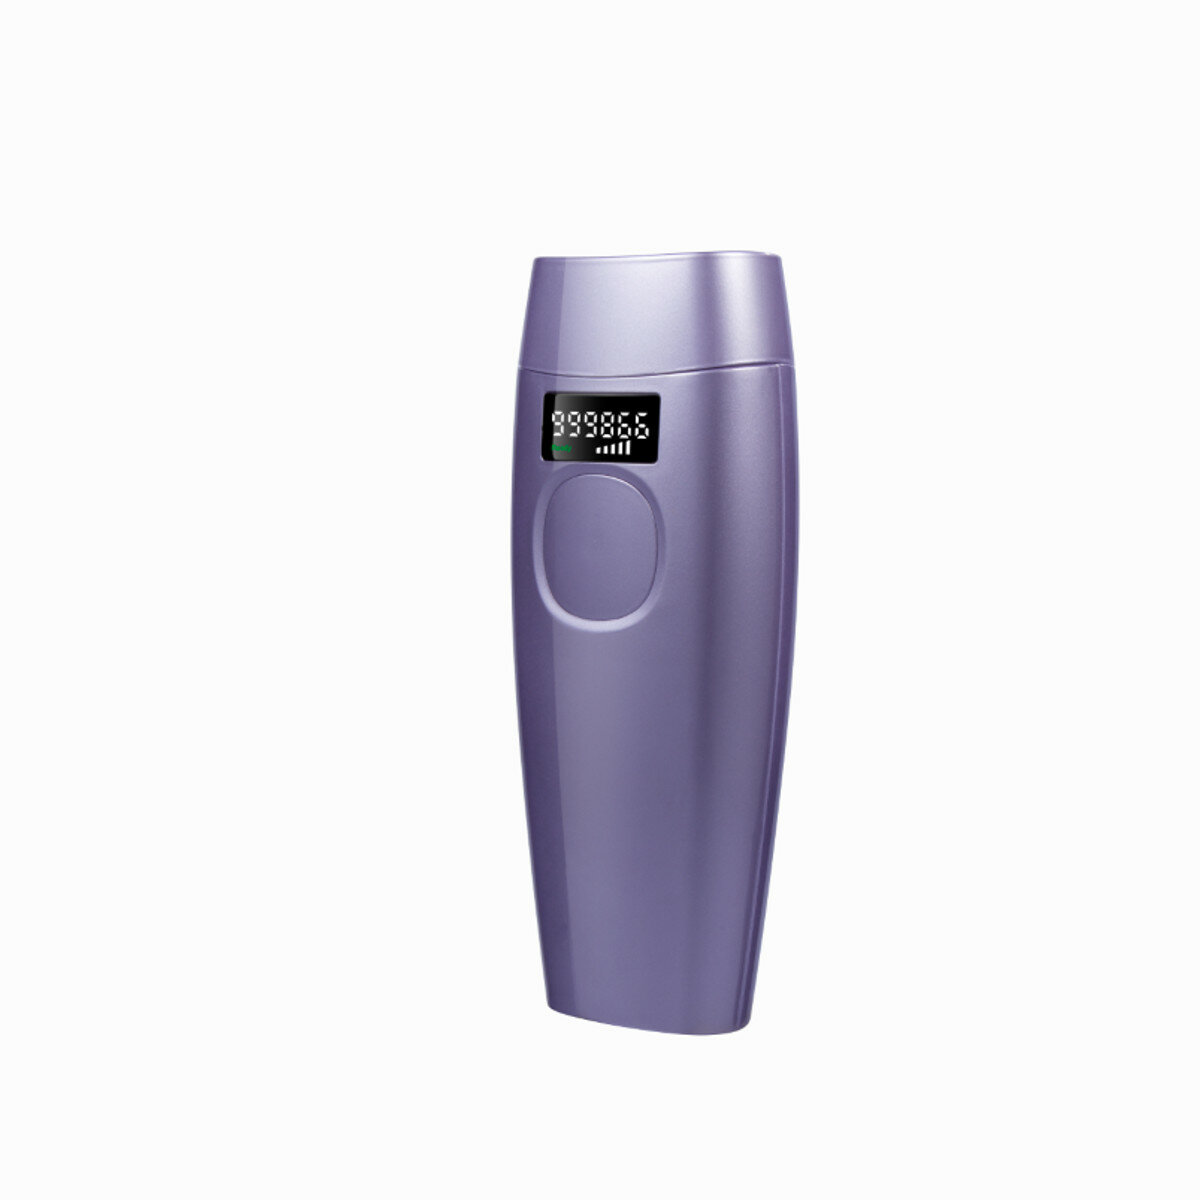 Image of 990000 Flash Professional Permanent Laser Epilator Hair Removal Machine For Body Face